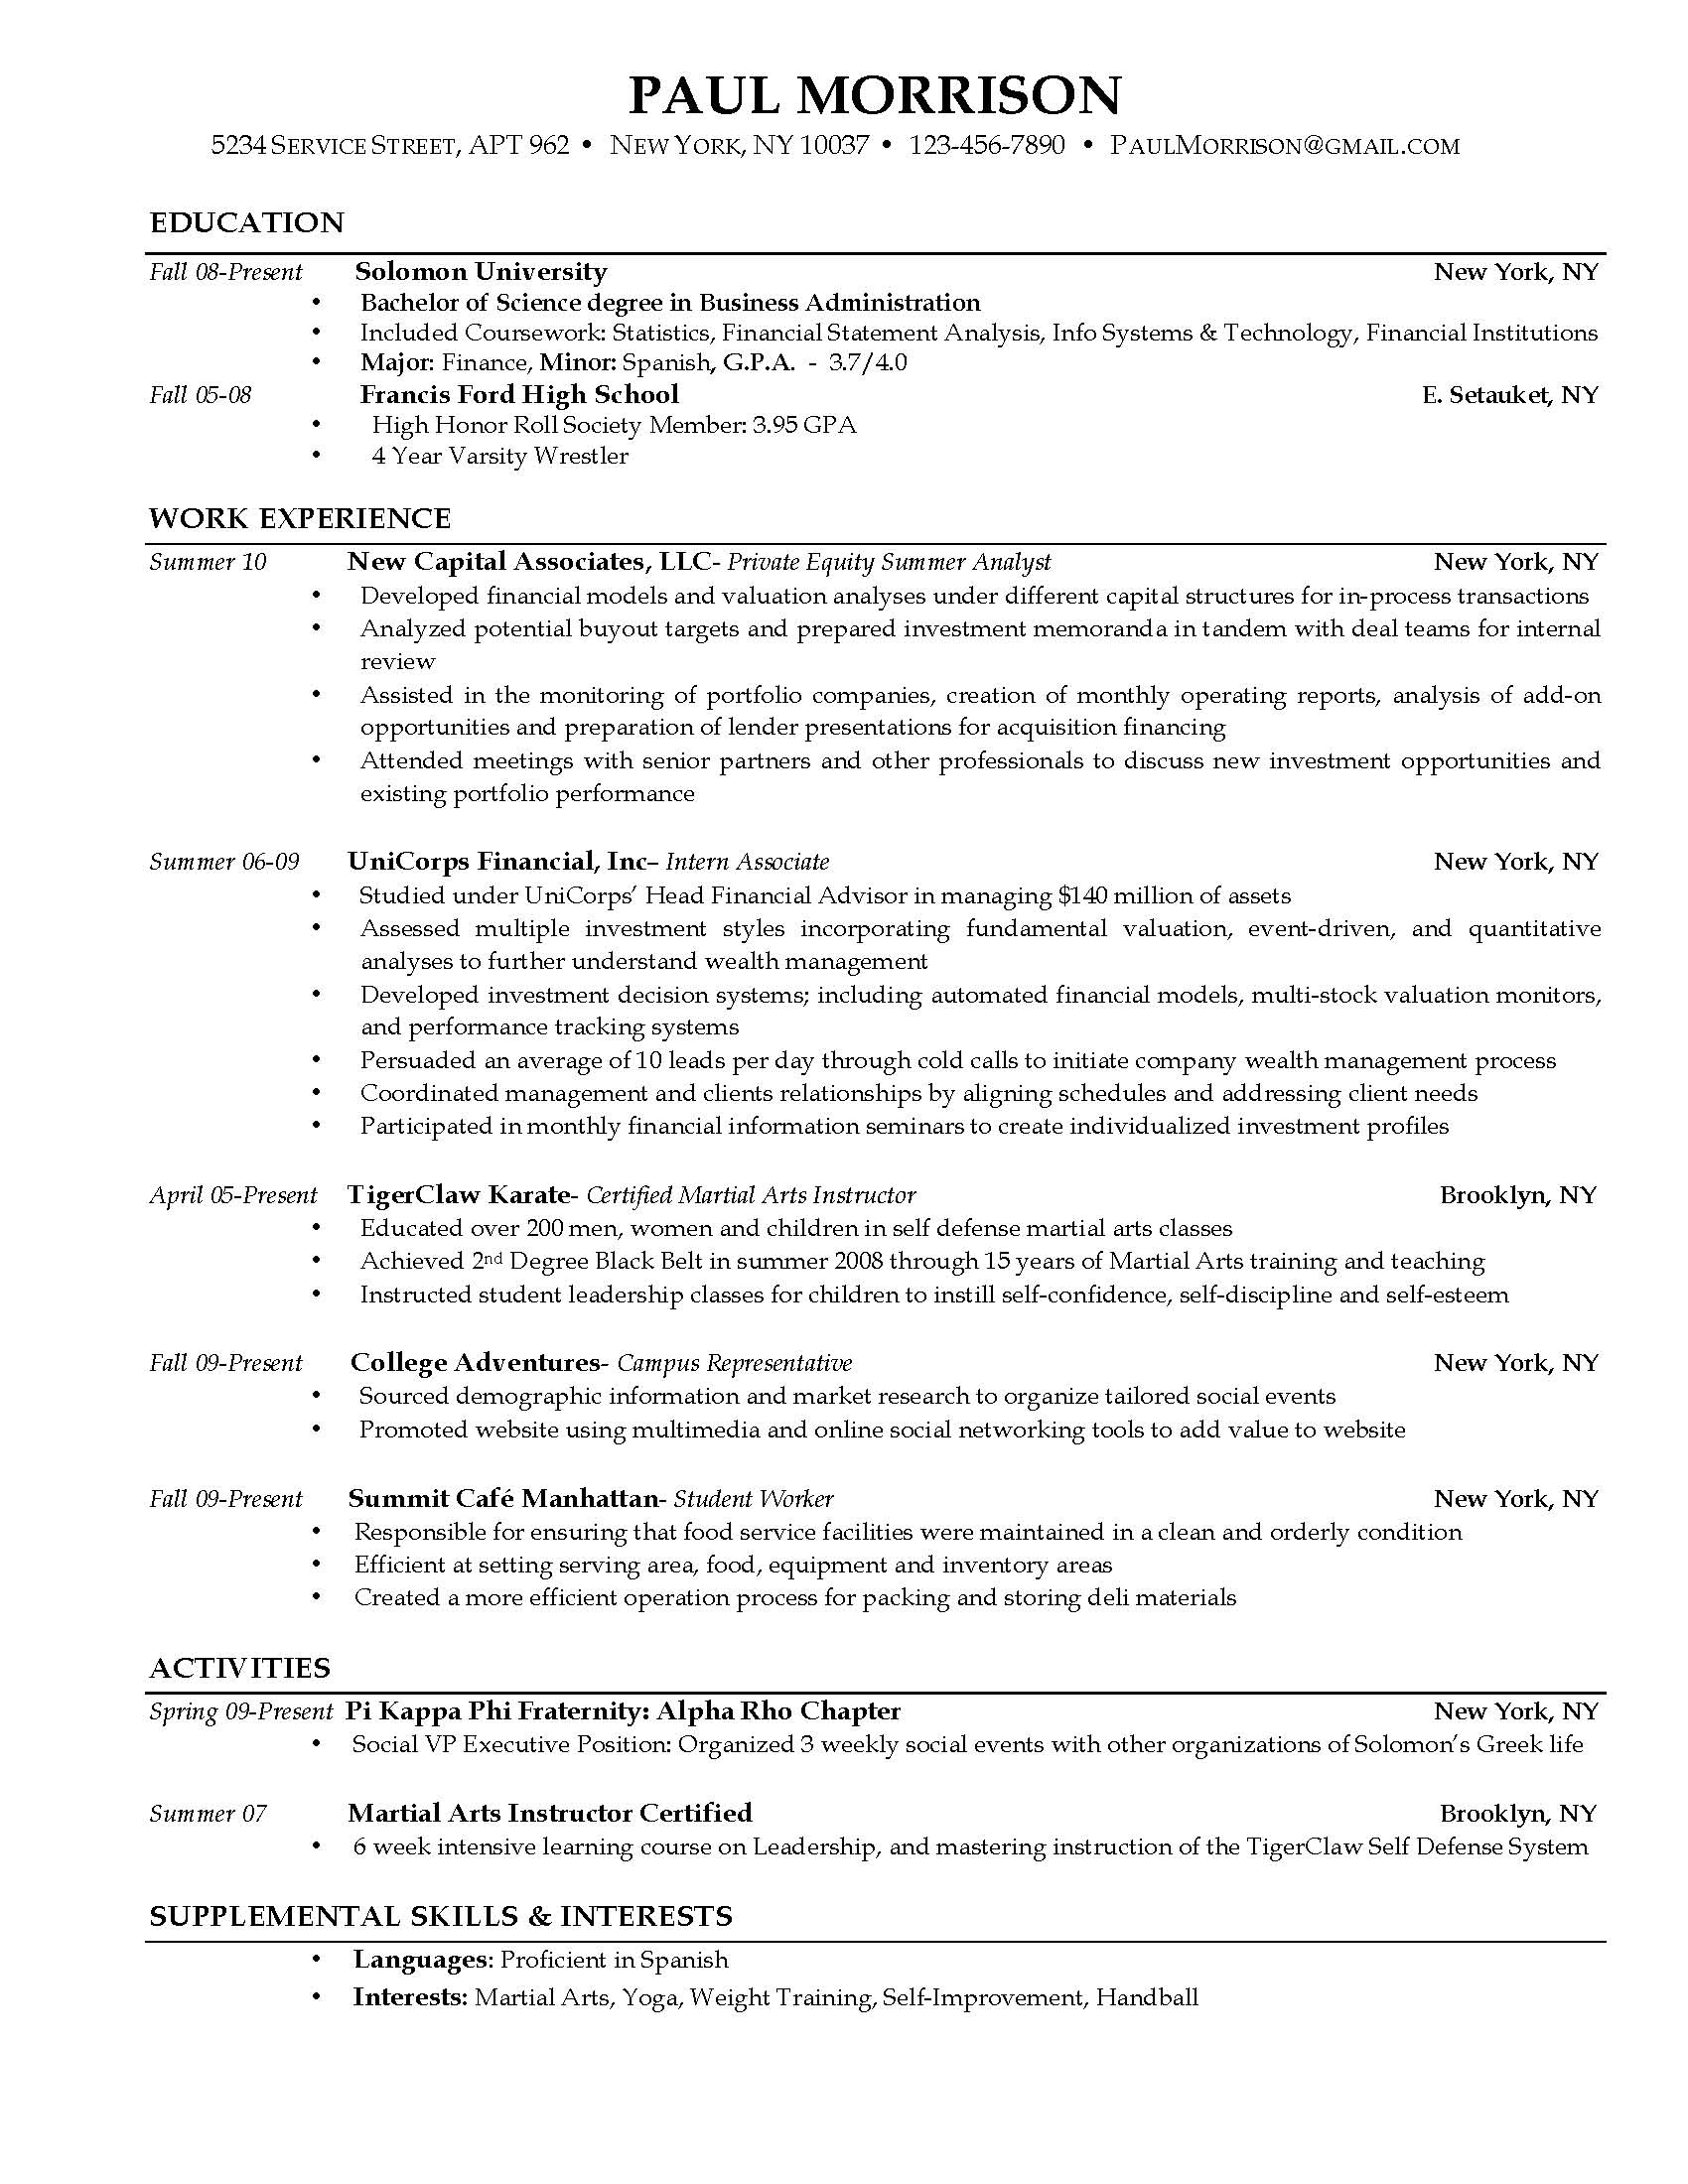 Resume Template For College Student. college student resume no 